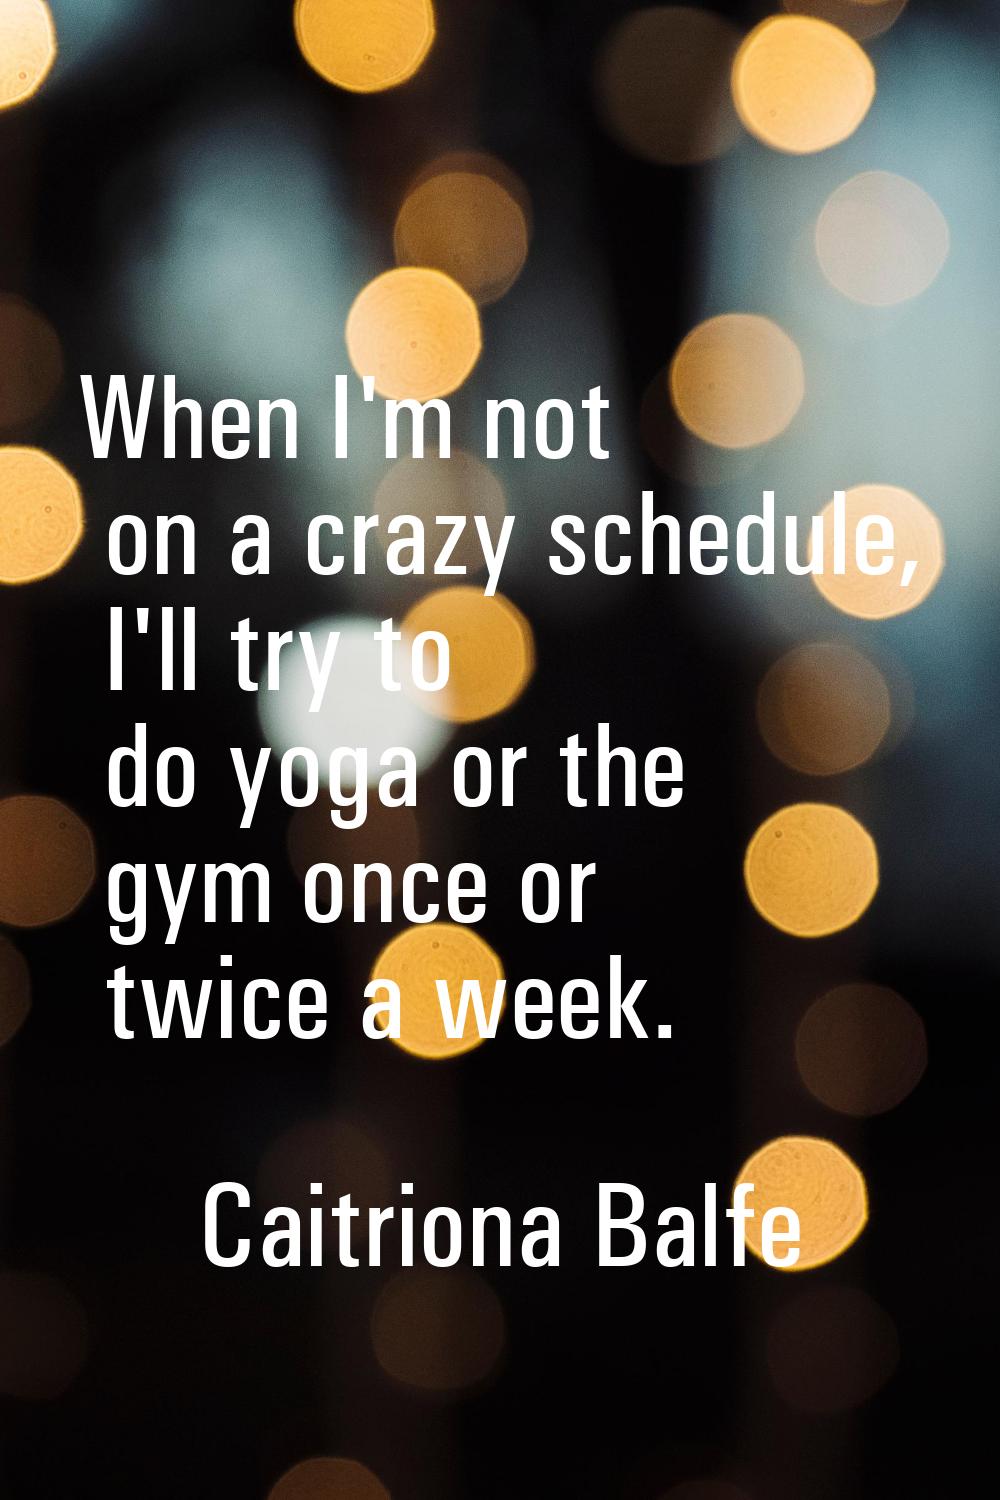 When I'm not on a crazy schedule, I'll try to do yoga or the gym once or twice a week.